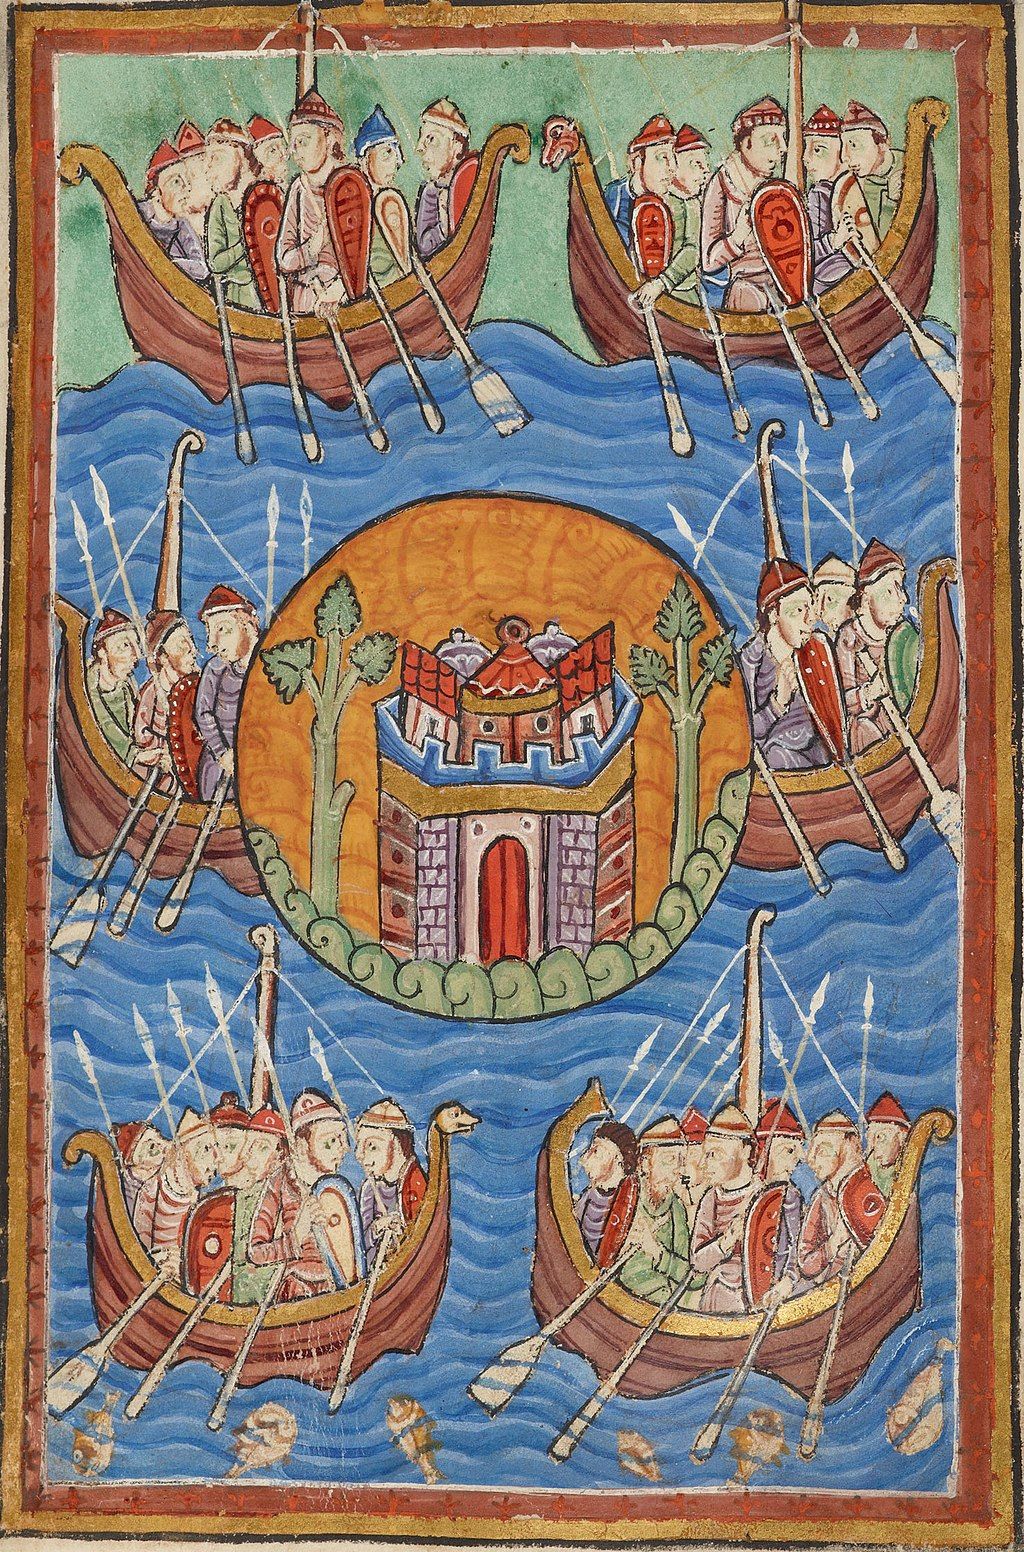 12th-century miniature of Saxons, Jutes, and Angles arriving in Britain